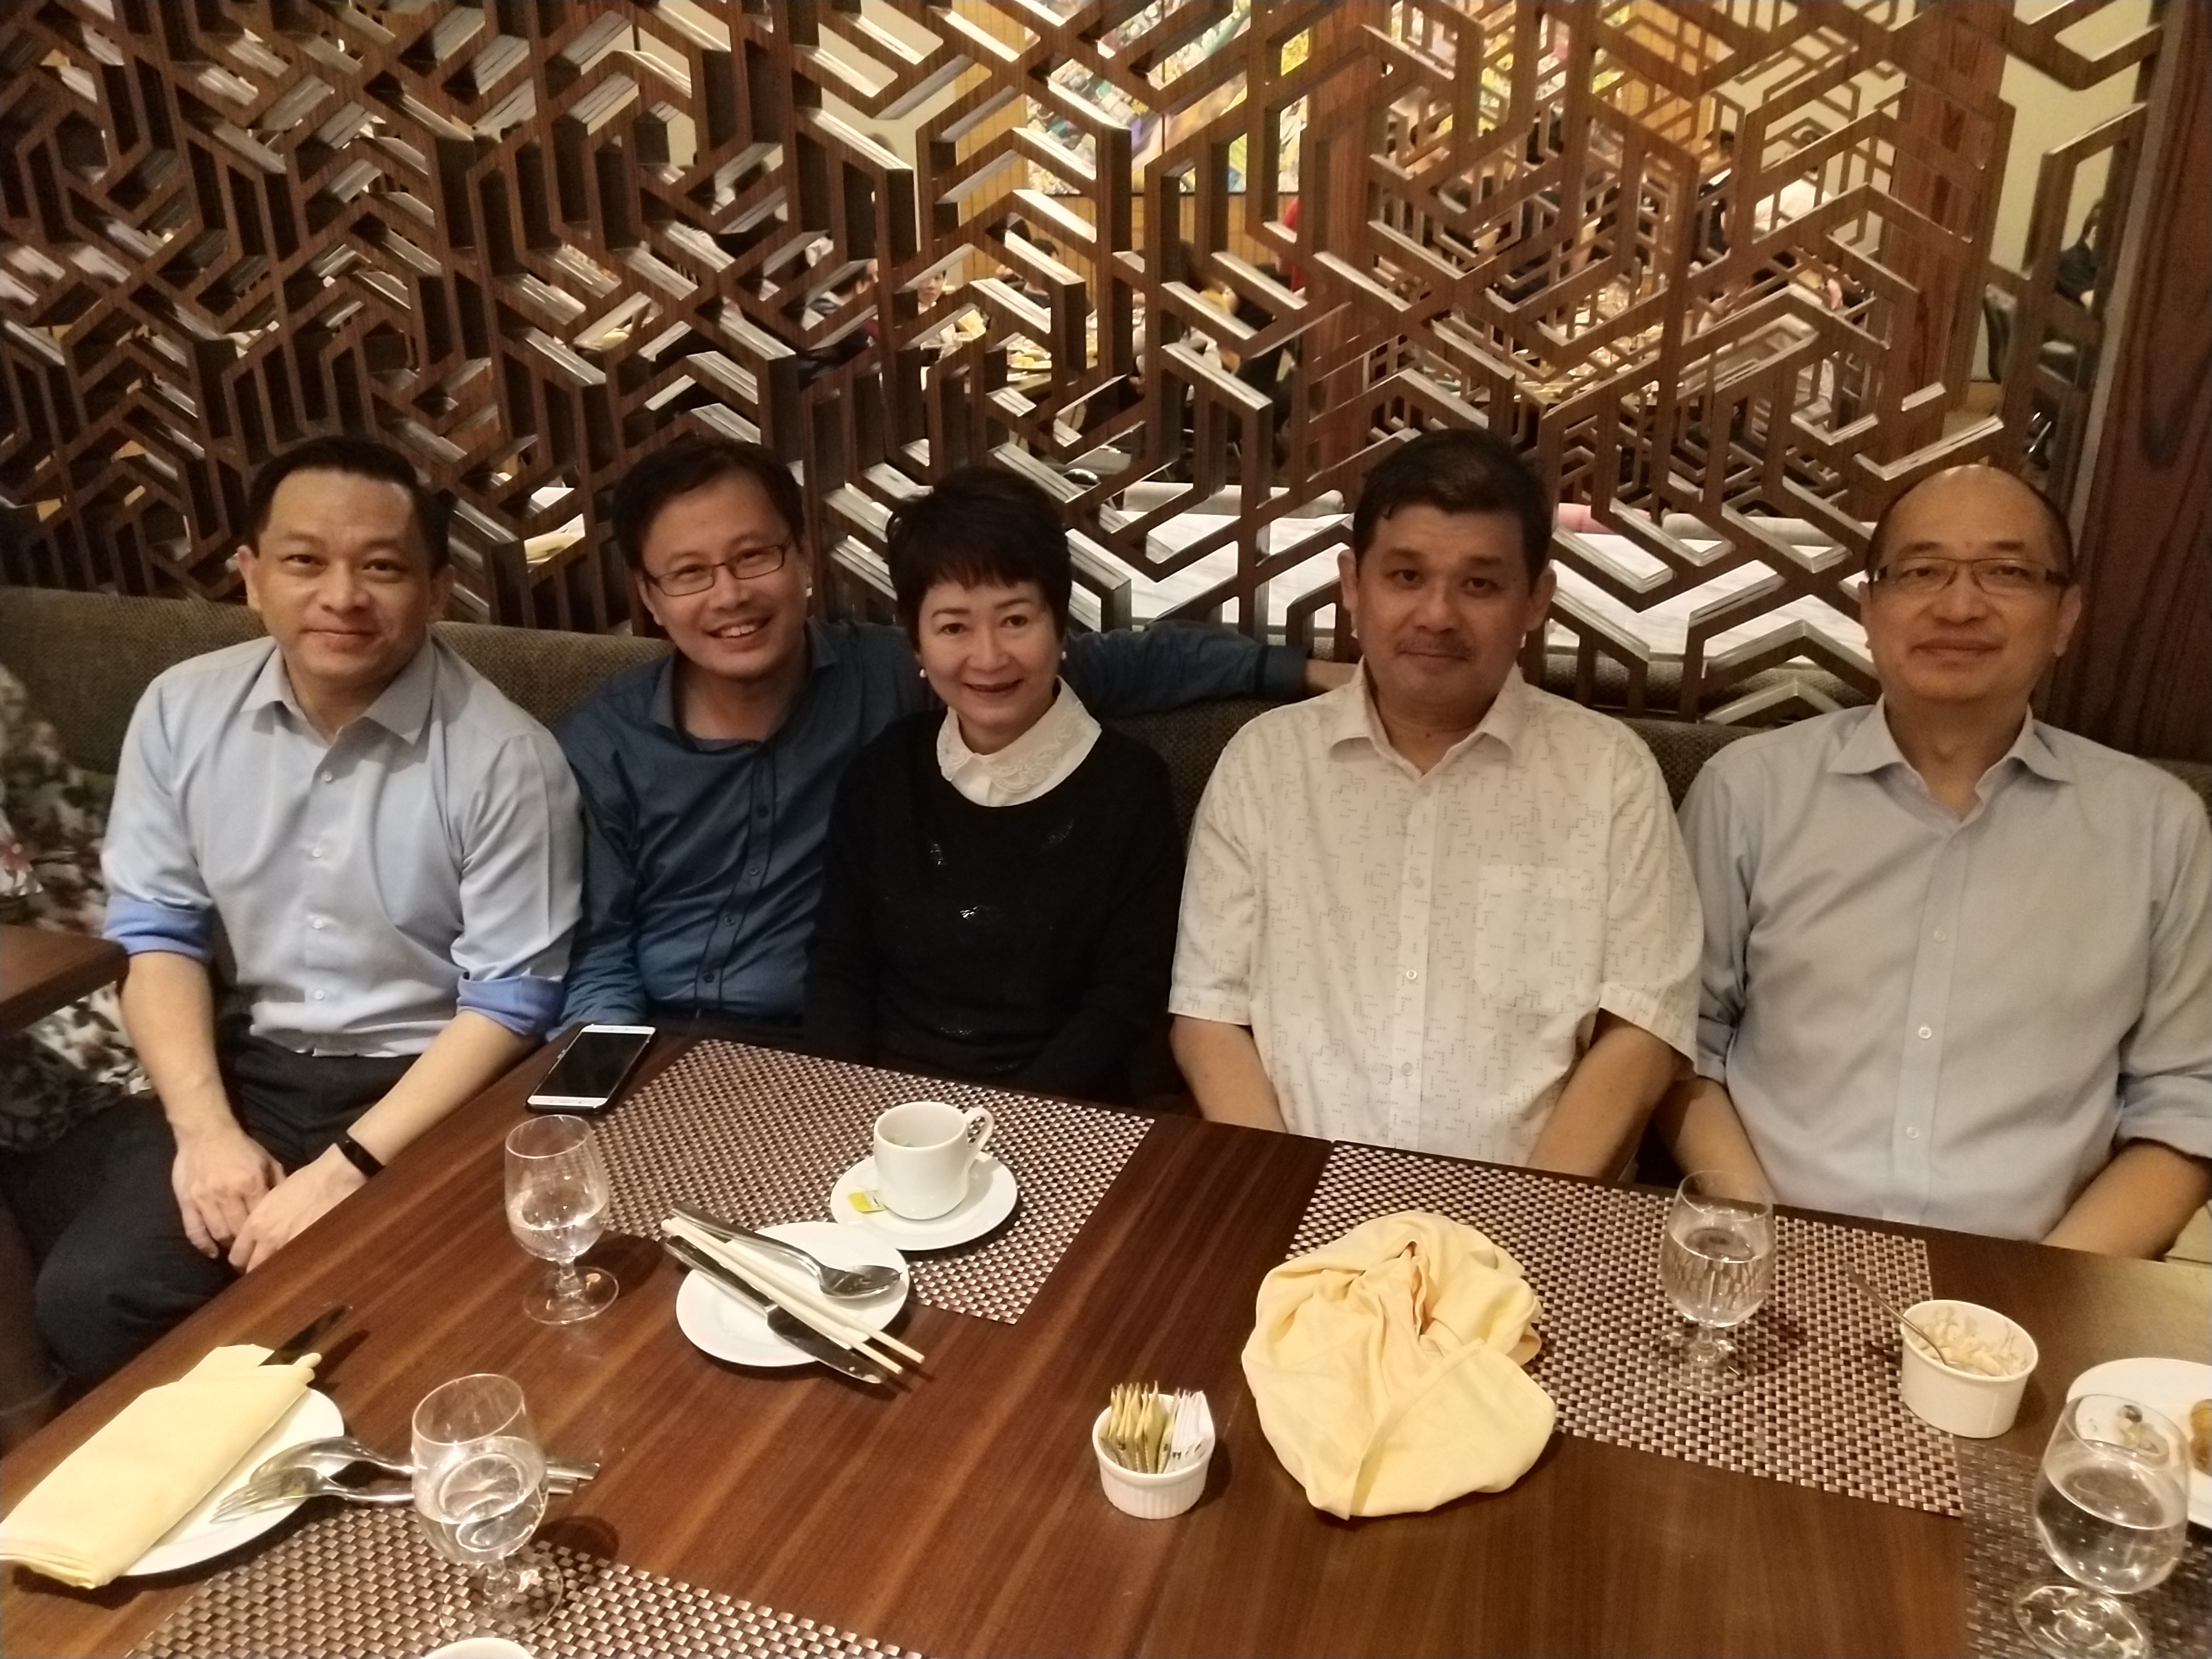 2019 Quarterly Top Achivers Lunch/Dinner